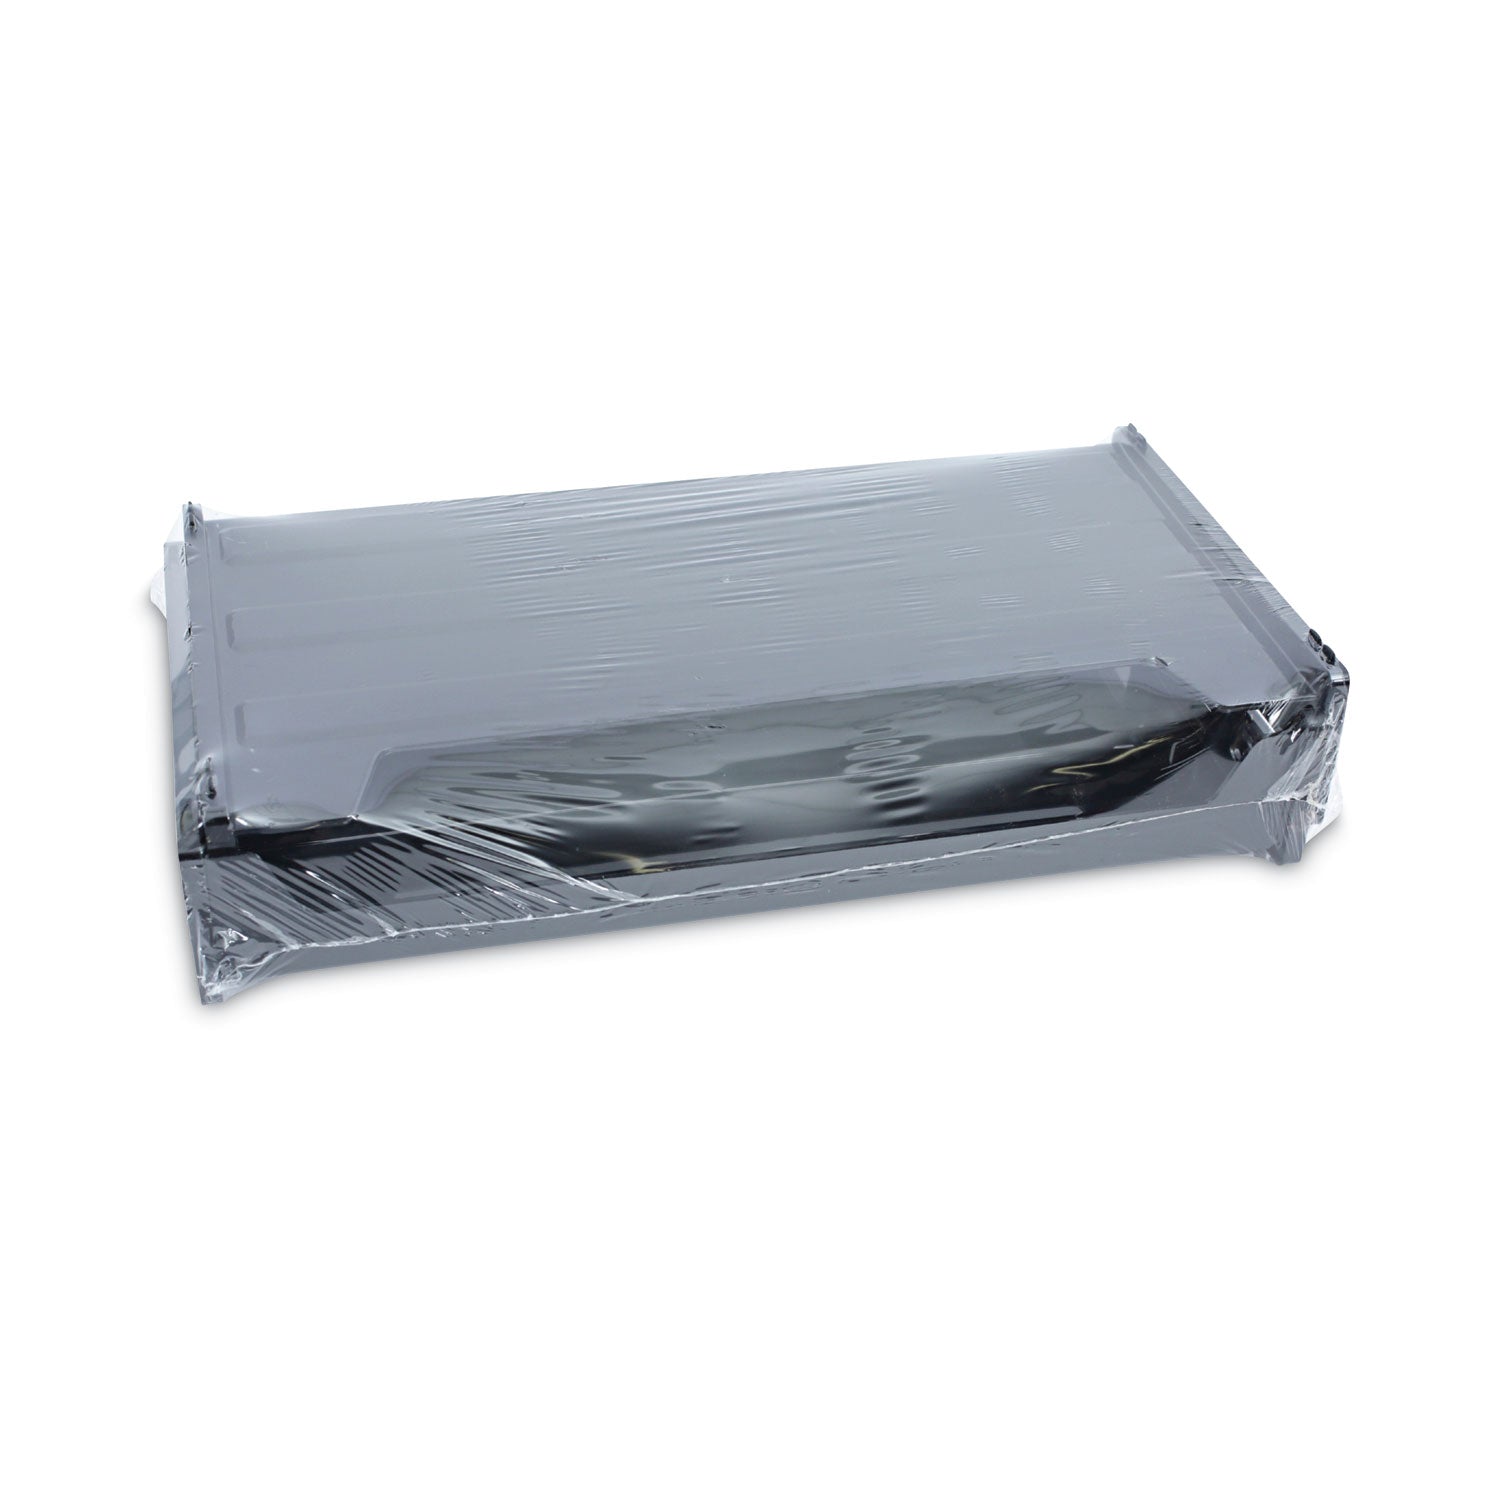 Recycled Plastic Side Load Desk Trays, 2 Sections, Legal Size Files, 16.25" x 9" x 2.75", Black - 